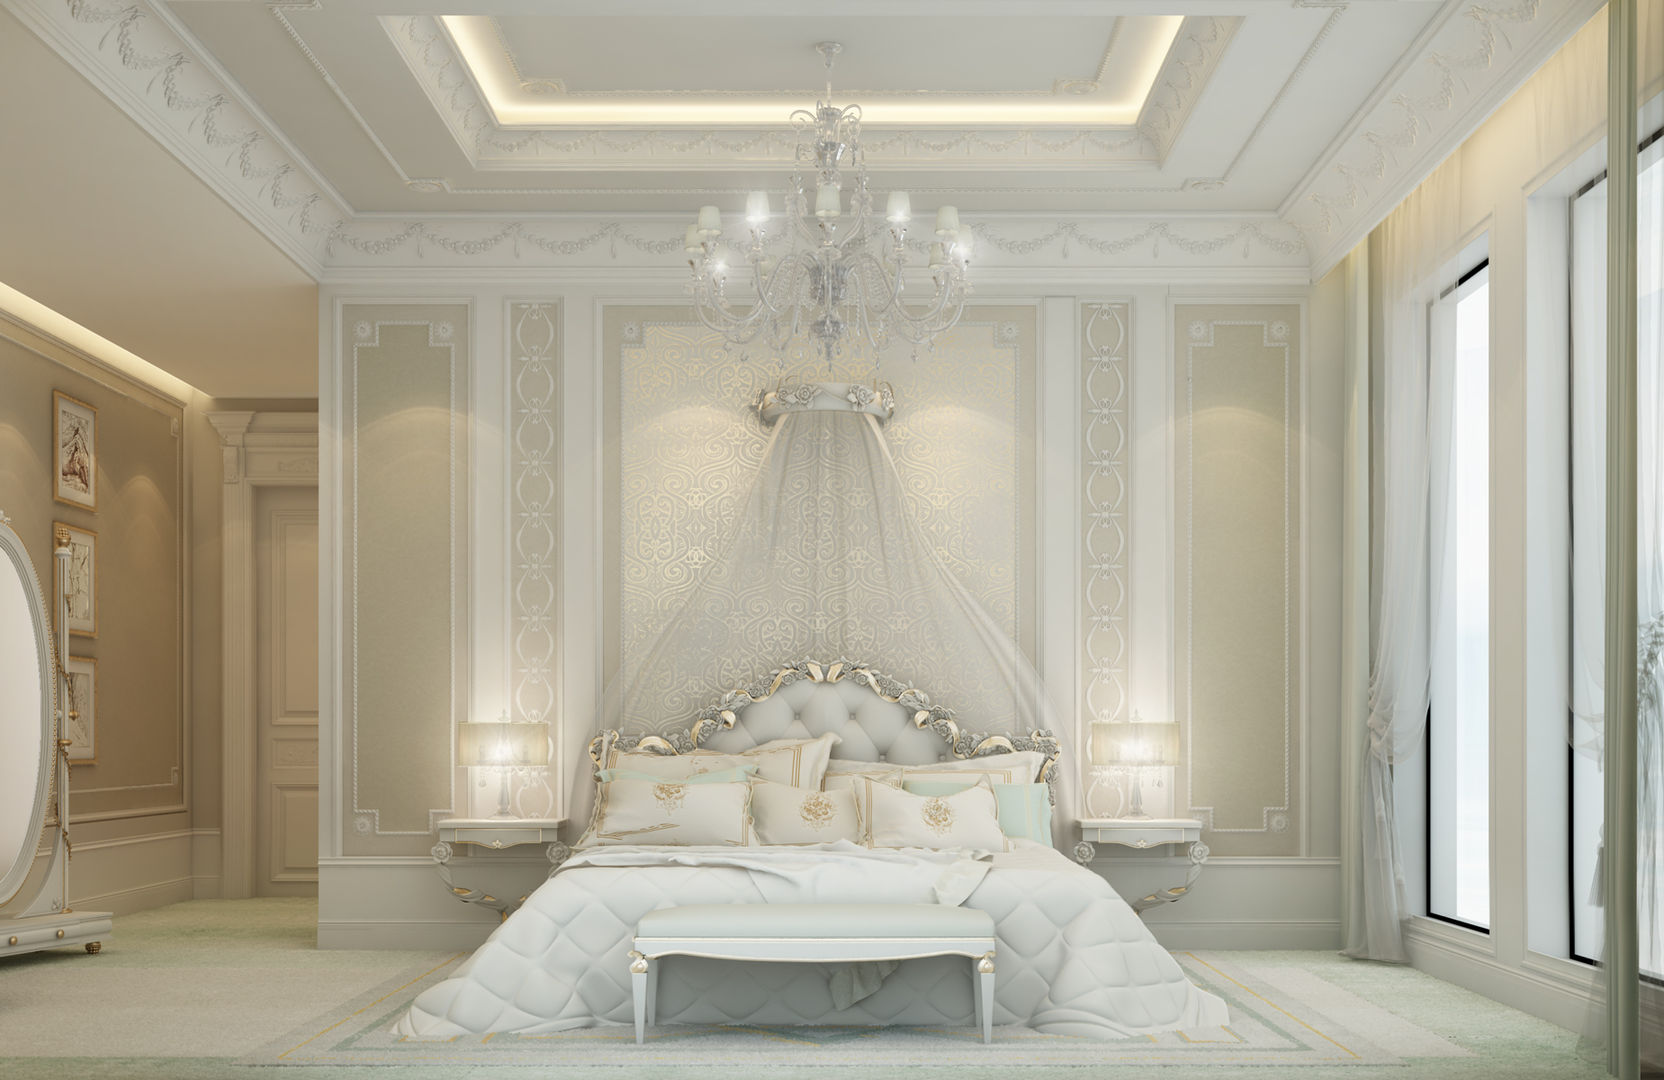 Bedroom Design in Soft and Restful Scheme, IONS DESIGN IONS DESIGN Bedroom سنگ مرمر bedroom design,interior design,home design,home interior